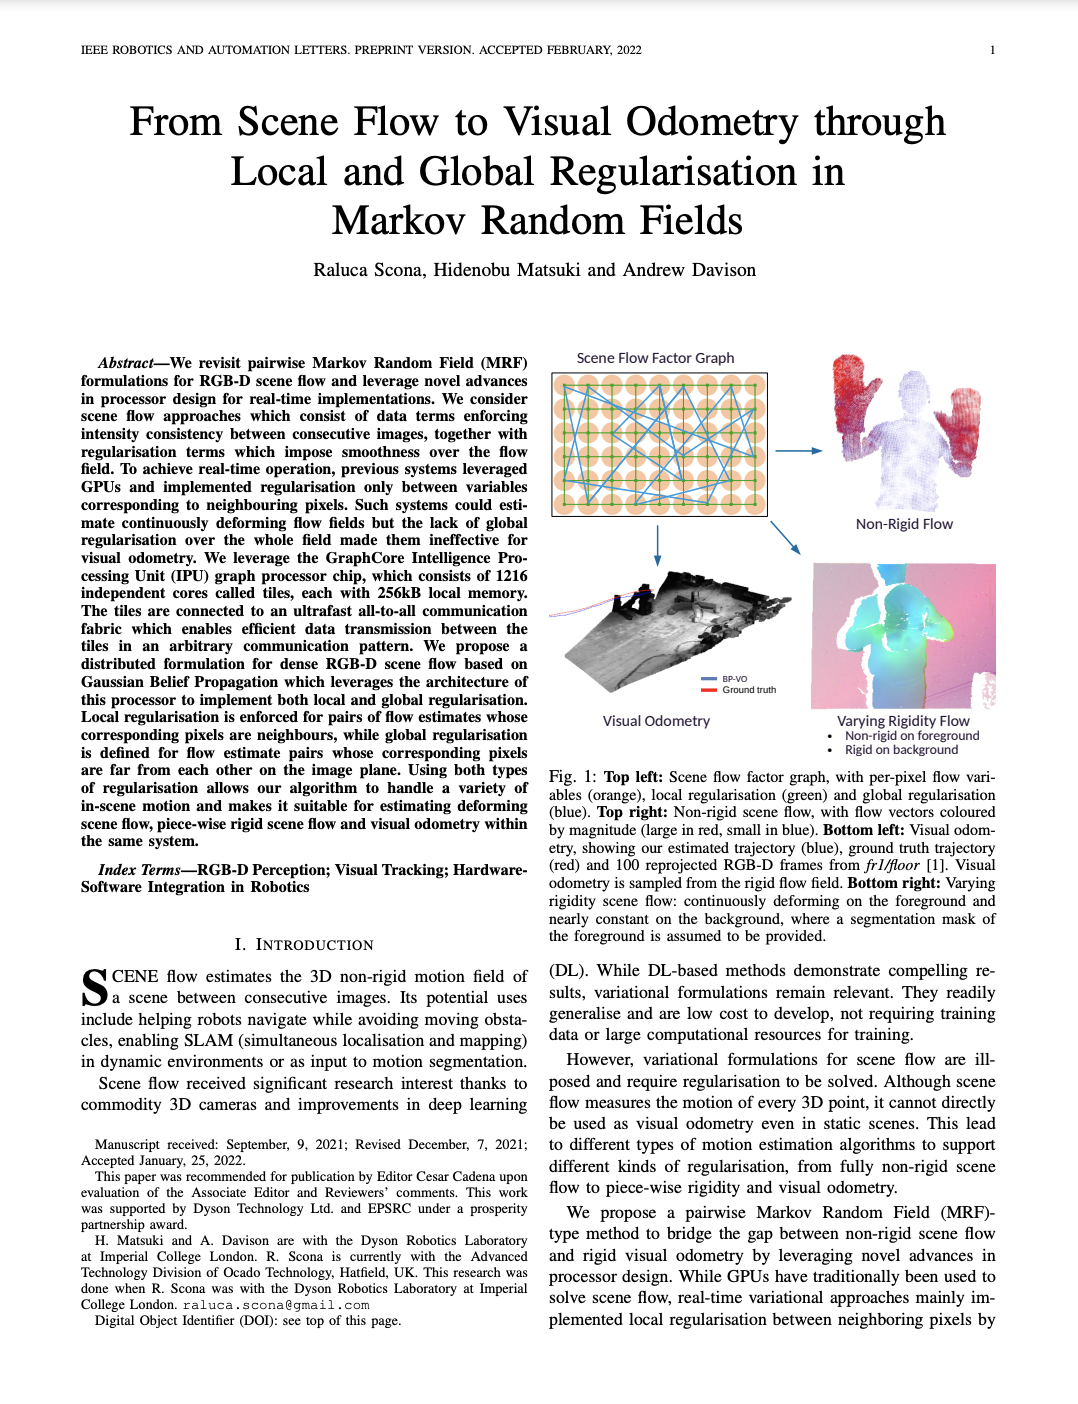 Imperial College London - Dyson Robotics Laboratory: From Scene Flow to Visual Odometry through Local and Global Regularisation in Markov Random Fields